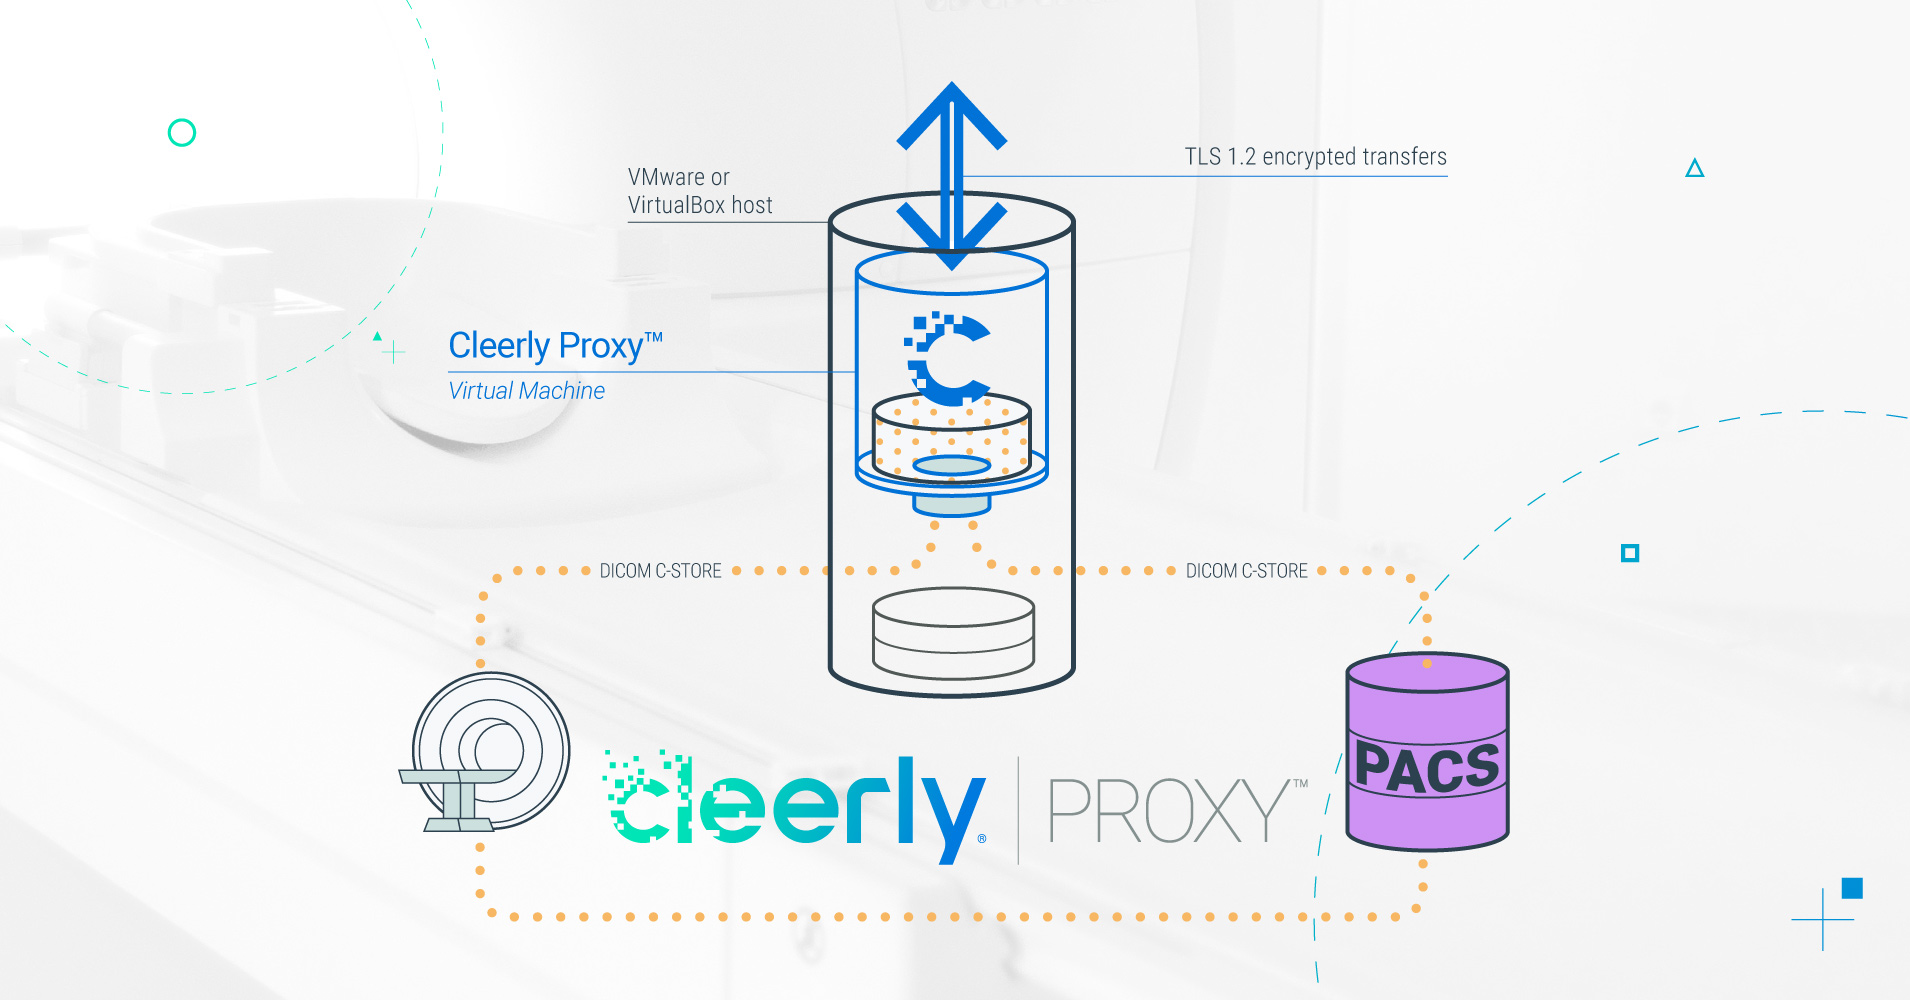 Cleerly's Proxy solution improves heart disease imaging workflows